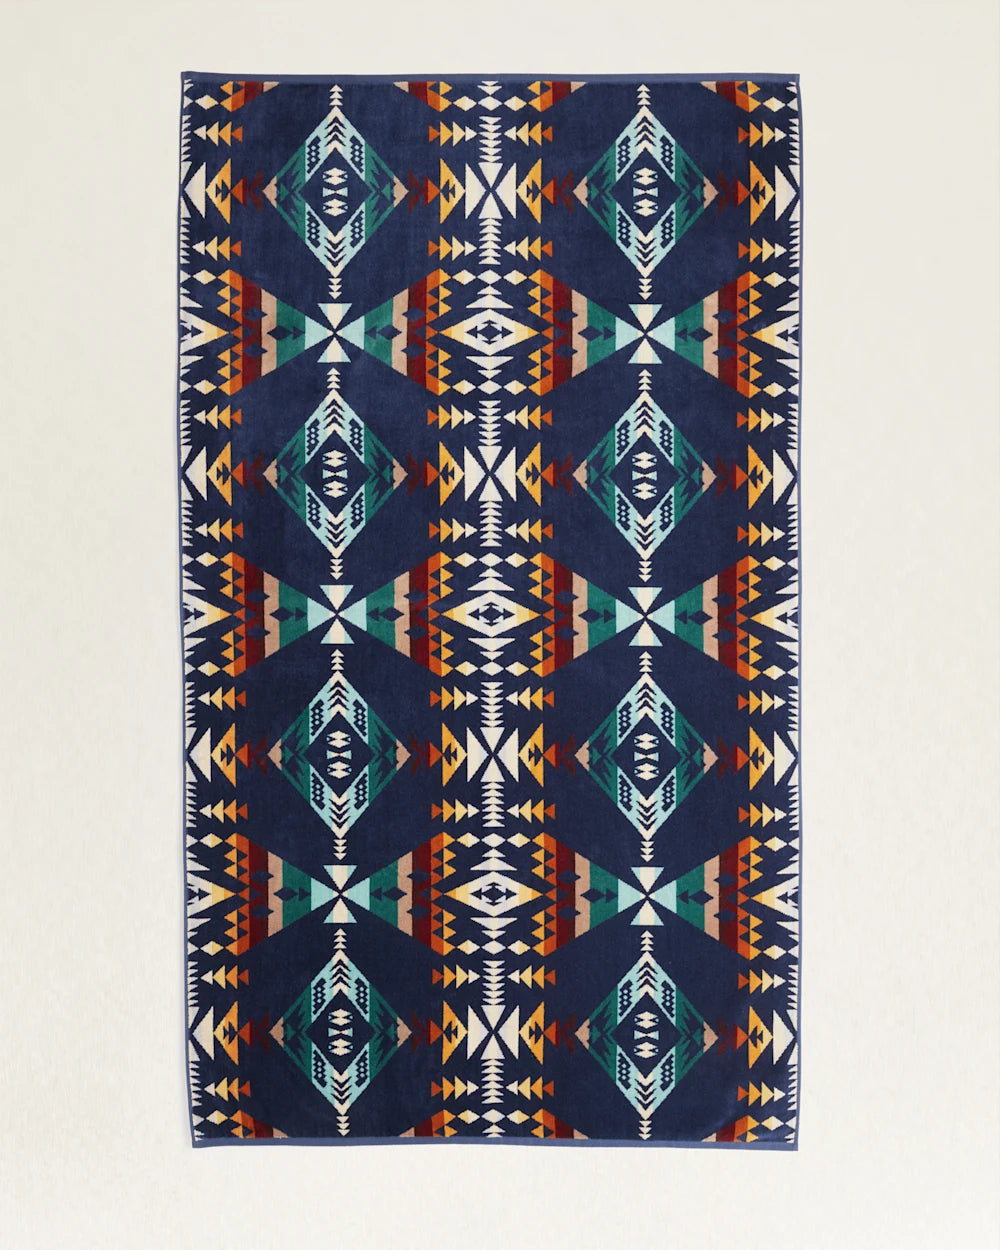 A symmetrical patterned rug featuring geometric shapes in shades of navy, orange, and white arranged in a traditional Native American-inspired design, ideal for a bungalow in Scottsdale, Arizona by Pendleton/Babblitt's Wholesale.